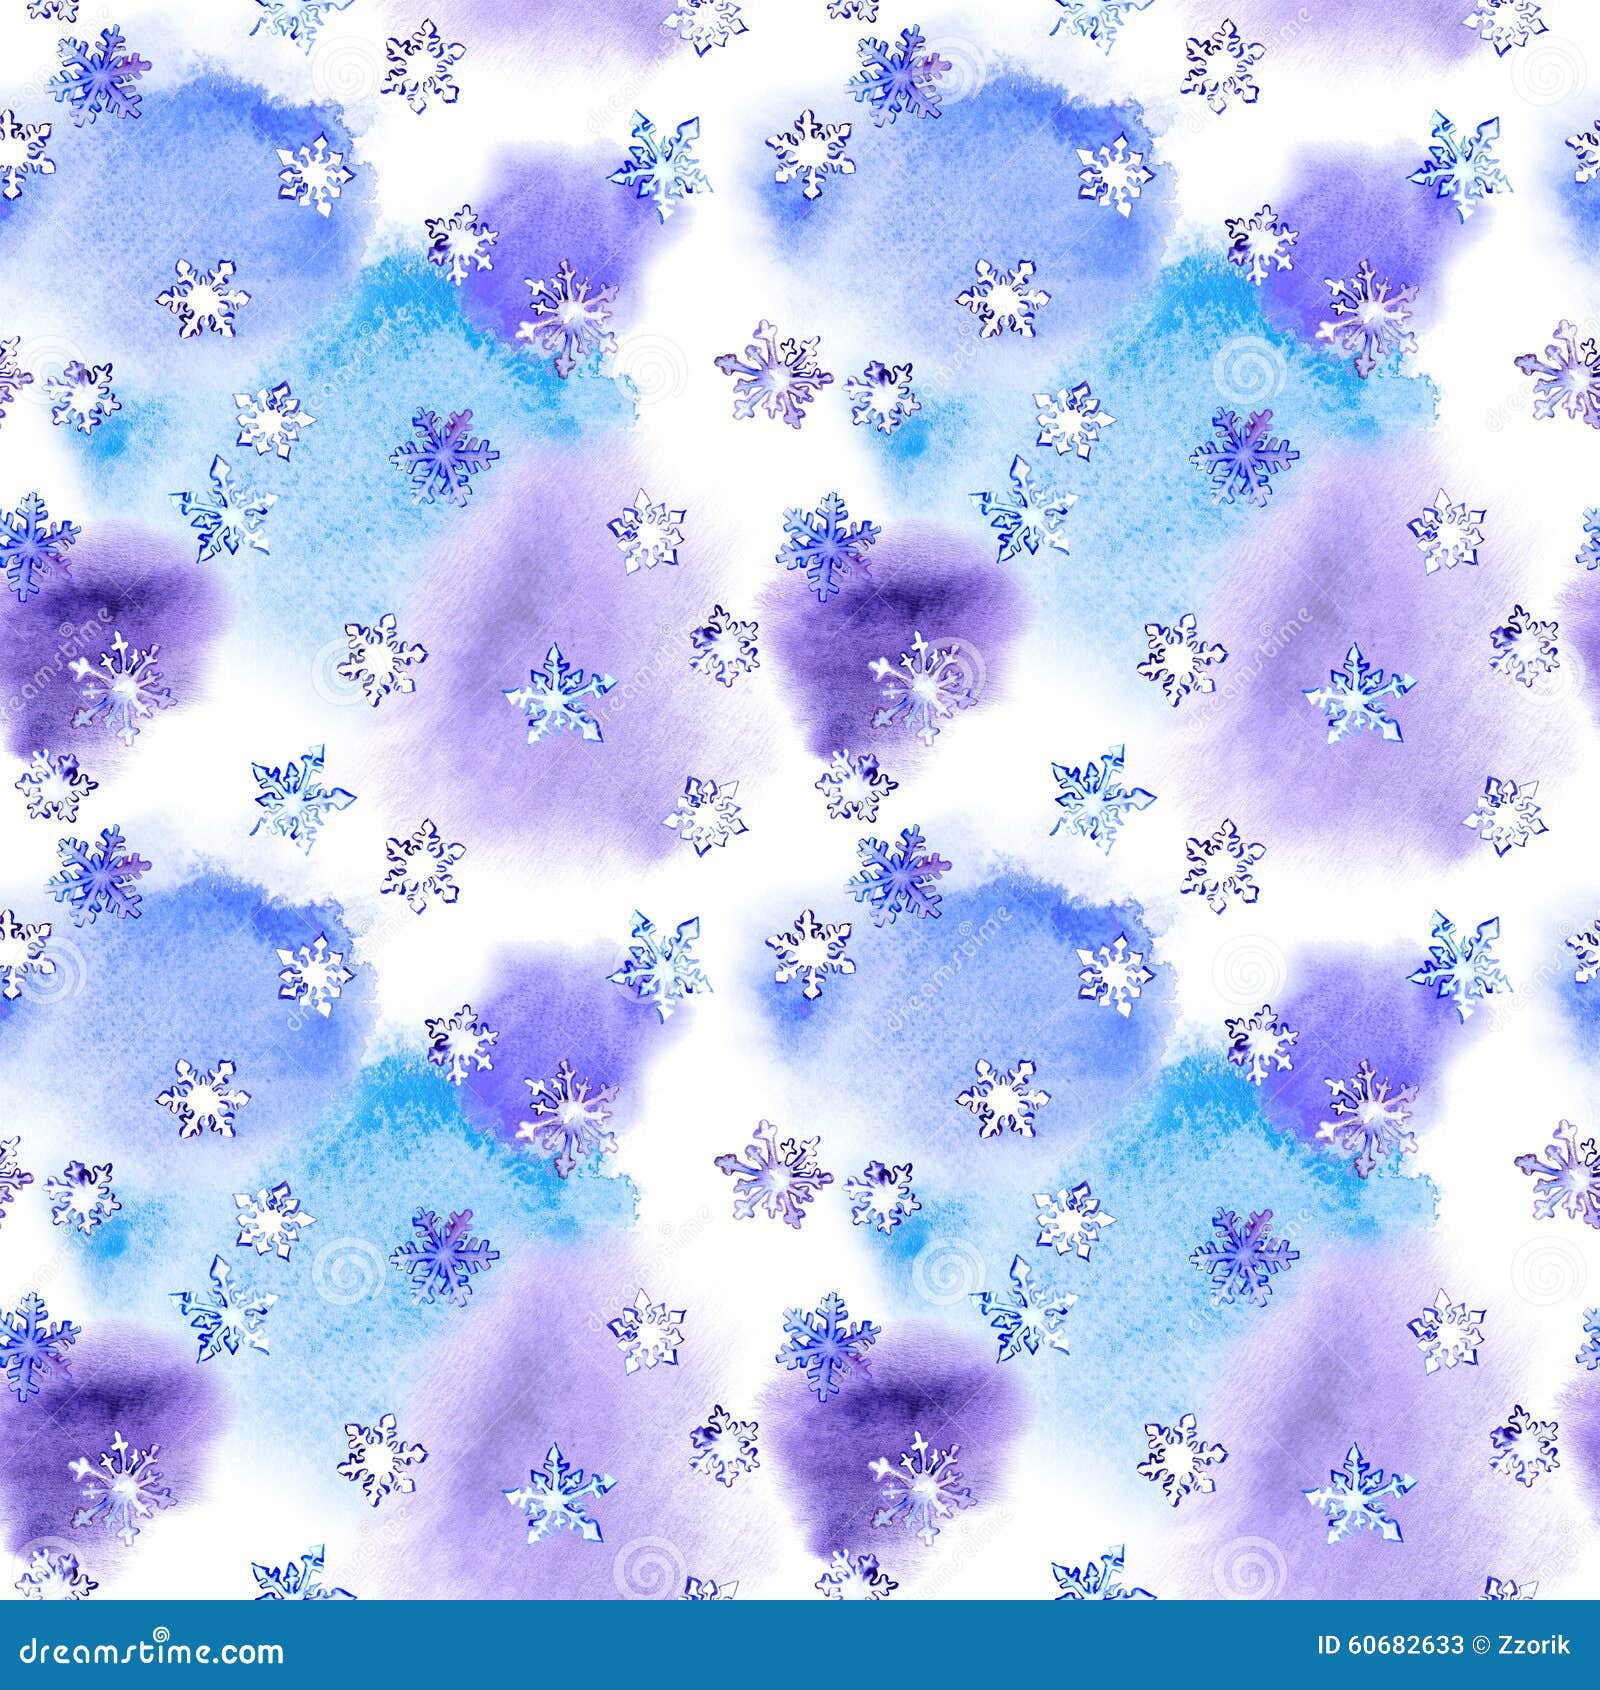 repeating winter pattern with snowflakes on blotch watercolor